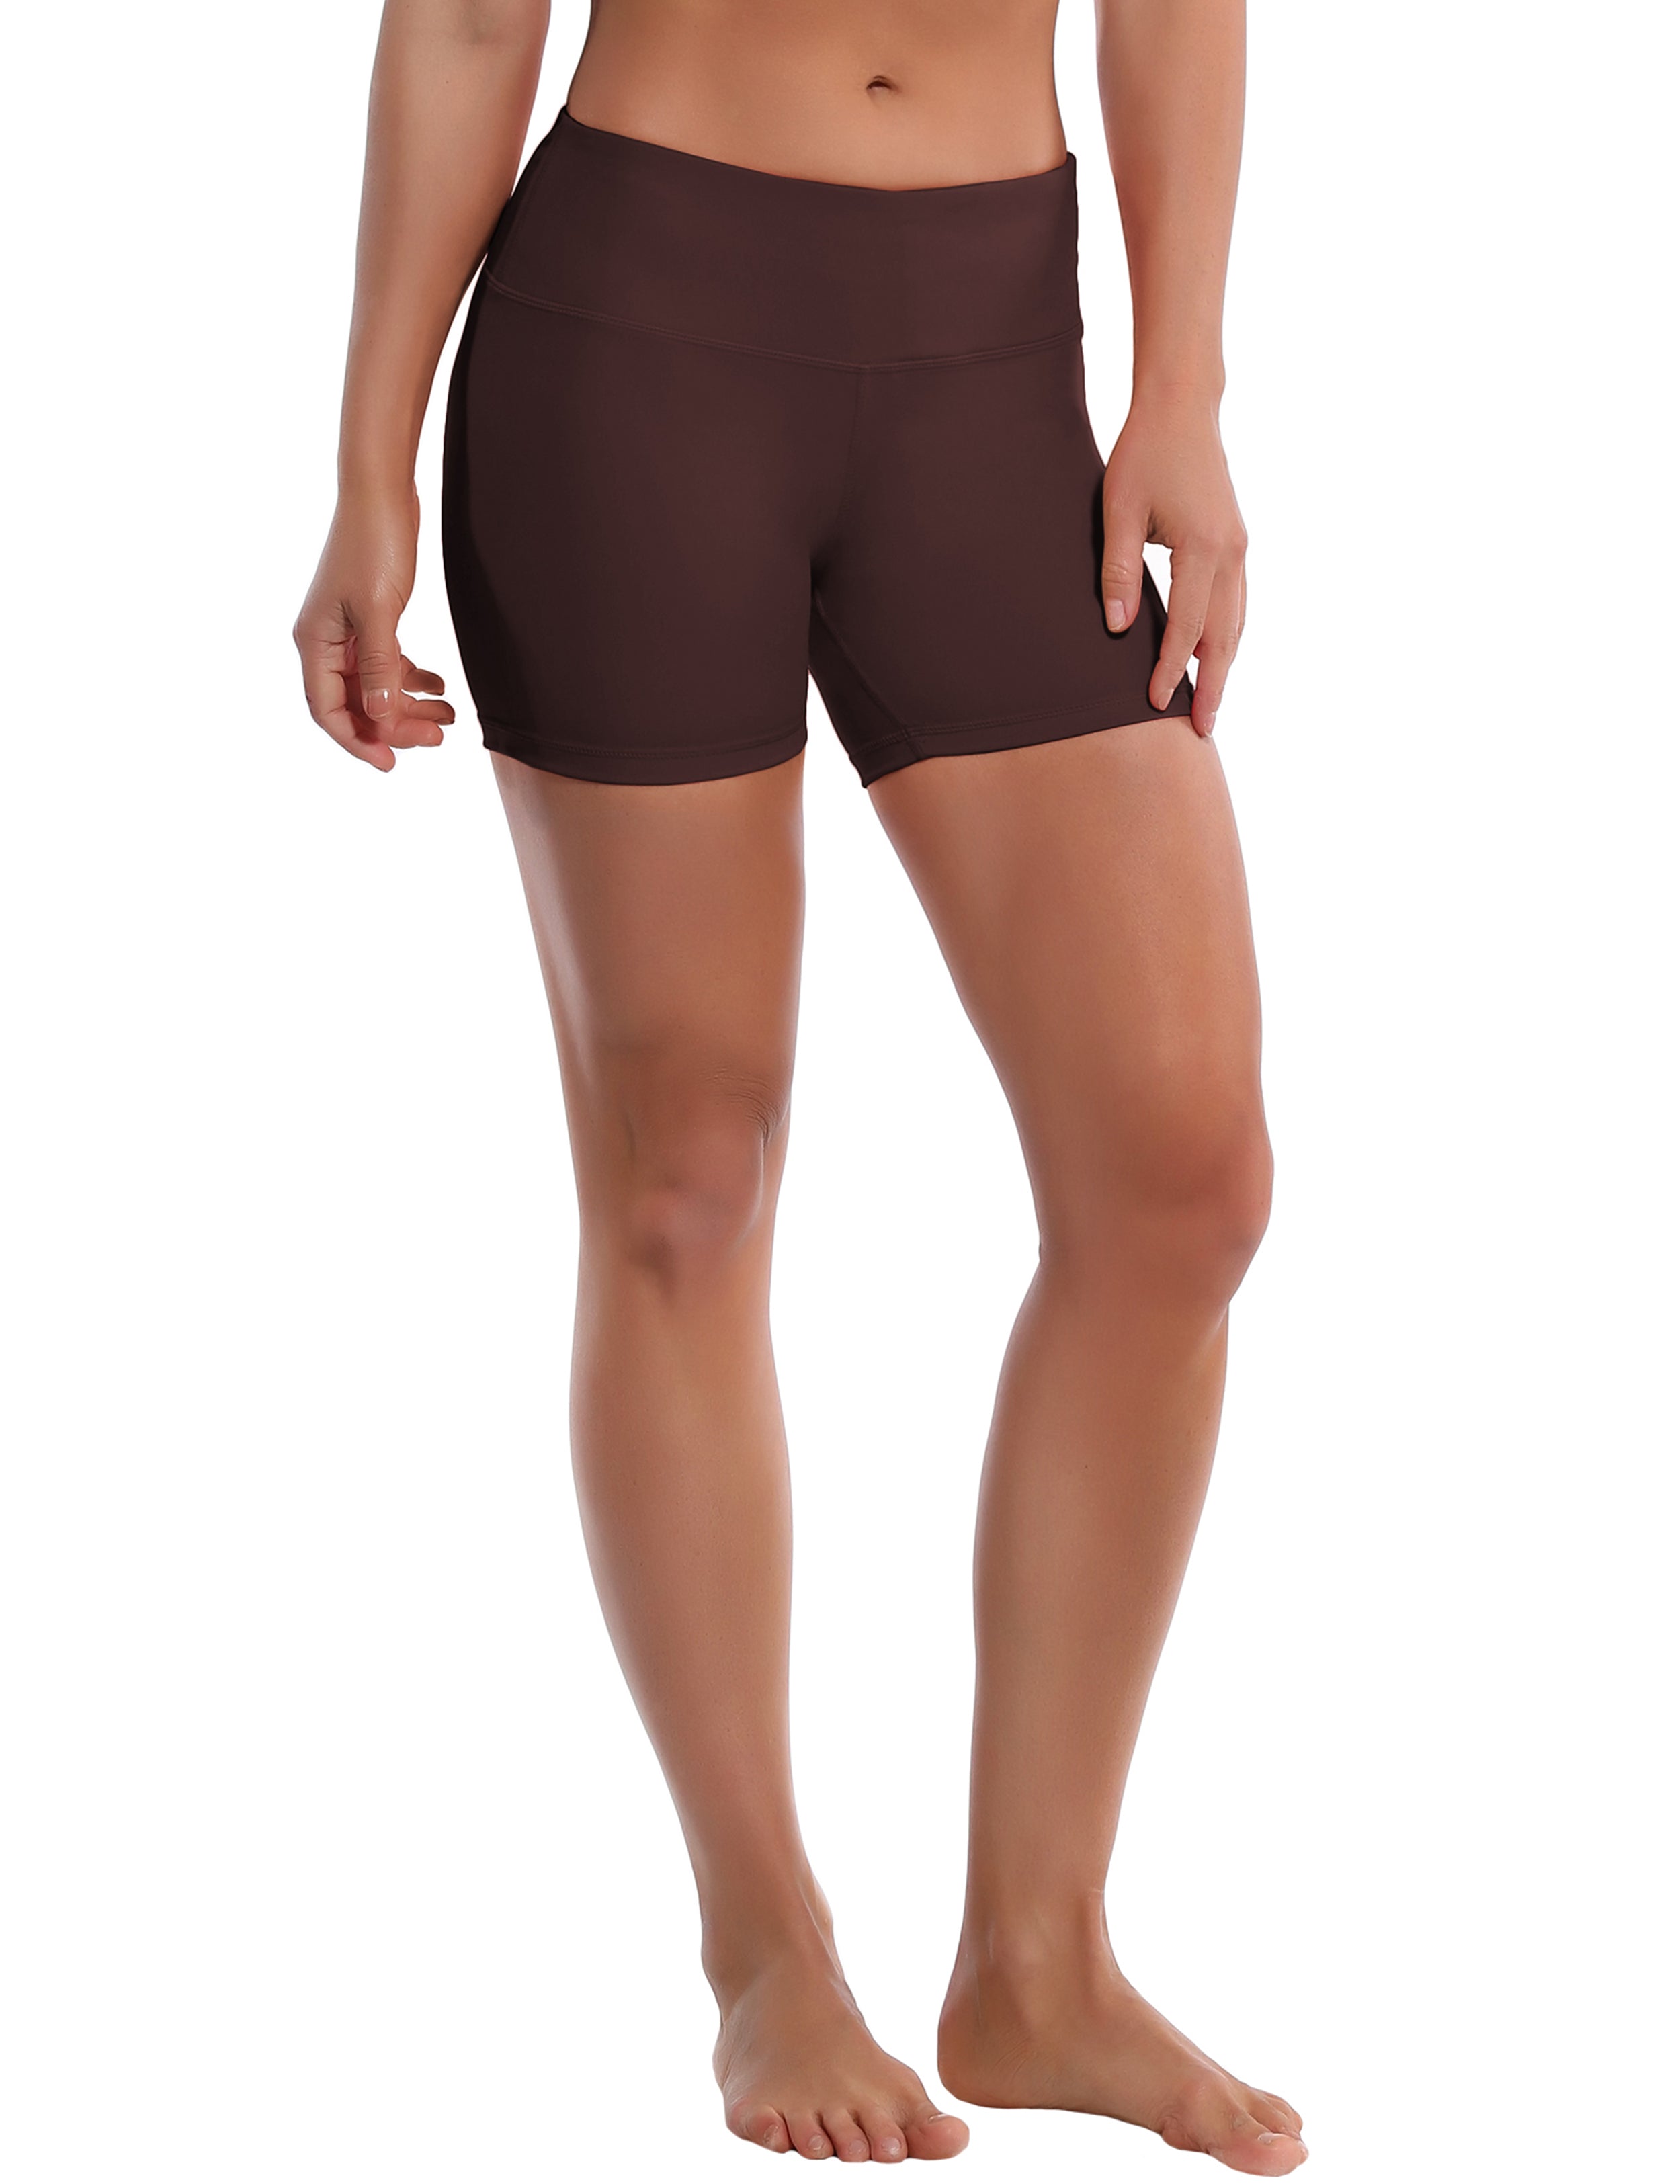 4" Tall Size Shorts mahoganymaroon Sleek, soft, smooth and totally comfortable: our newest style is here. Softest-ever fabric High elasticity High density 4-way stretch Fabric doesn't attract lint easily No see-through Moisture-wicking Machine wash 75% Nylon, 25% Spandex